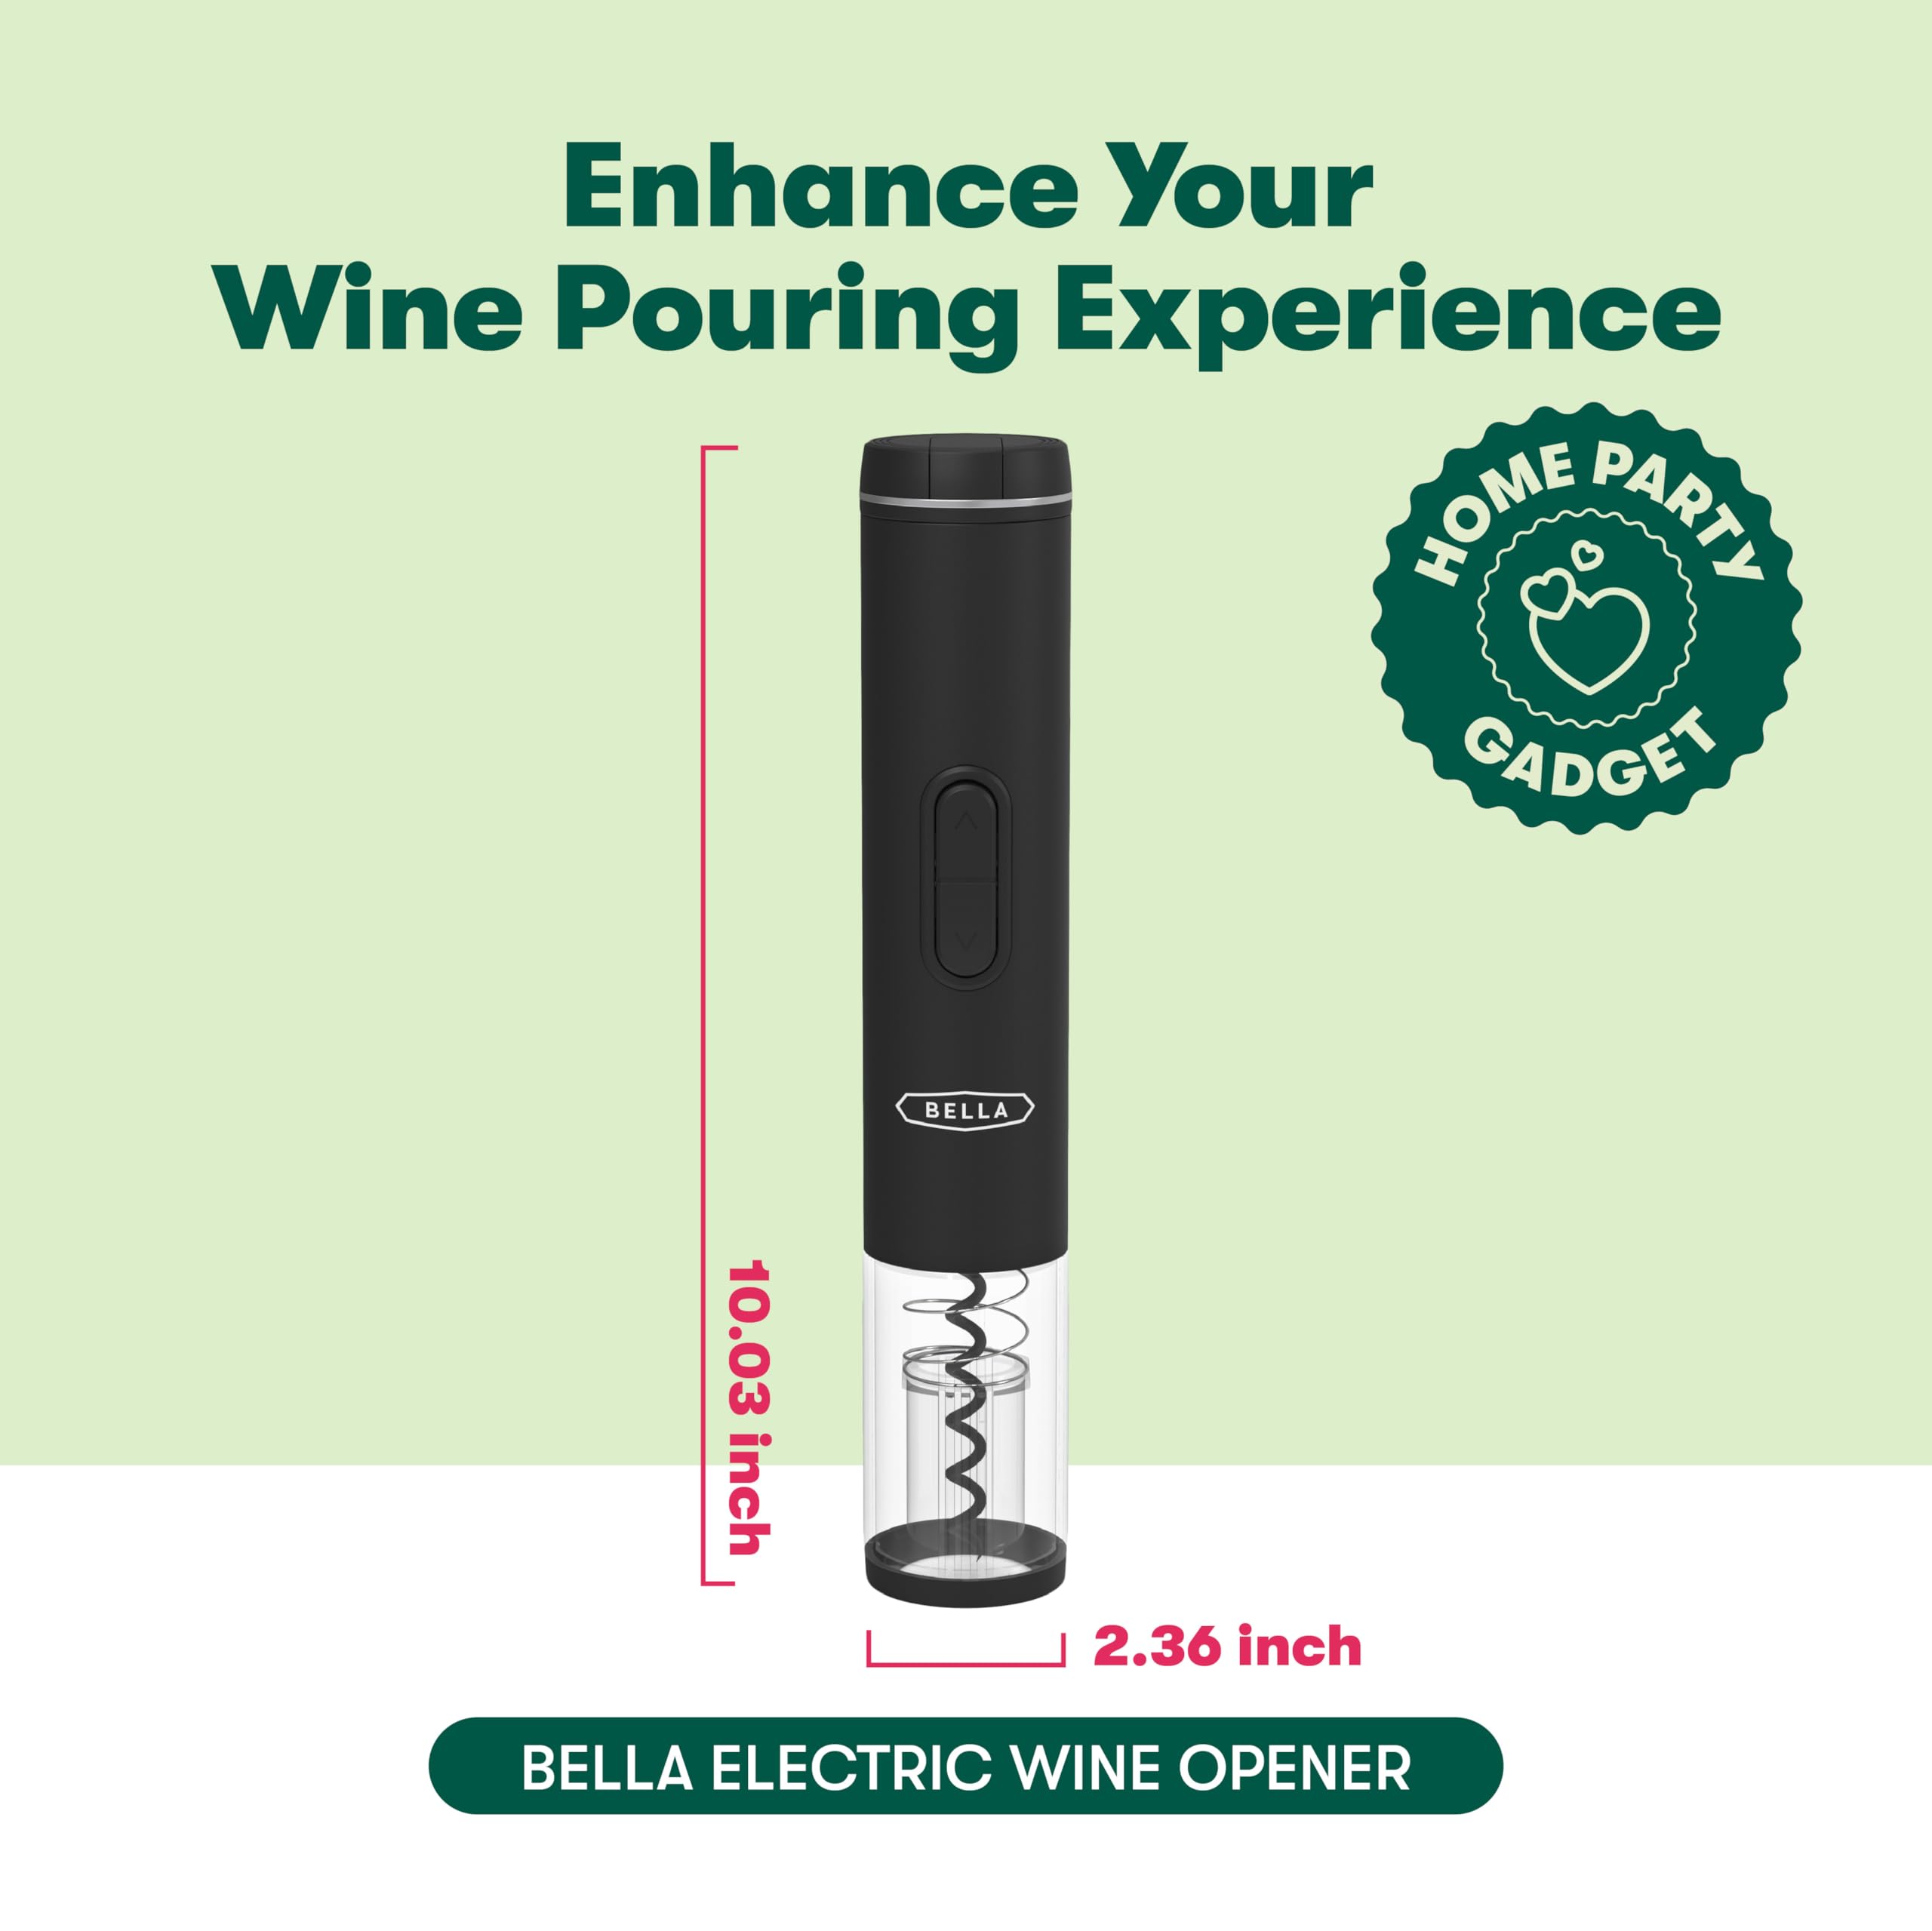 BELLA Electric Wine Opener, Automatic Electric Bottle Opener and Corkscrew with Foil Cutter, Battery Operated, One-Click Button, Fun Kitchen Gadgets and Gifts for Wine Lovers and New Home, Black